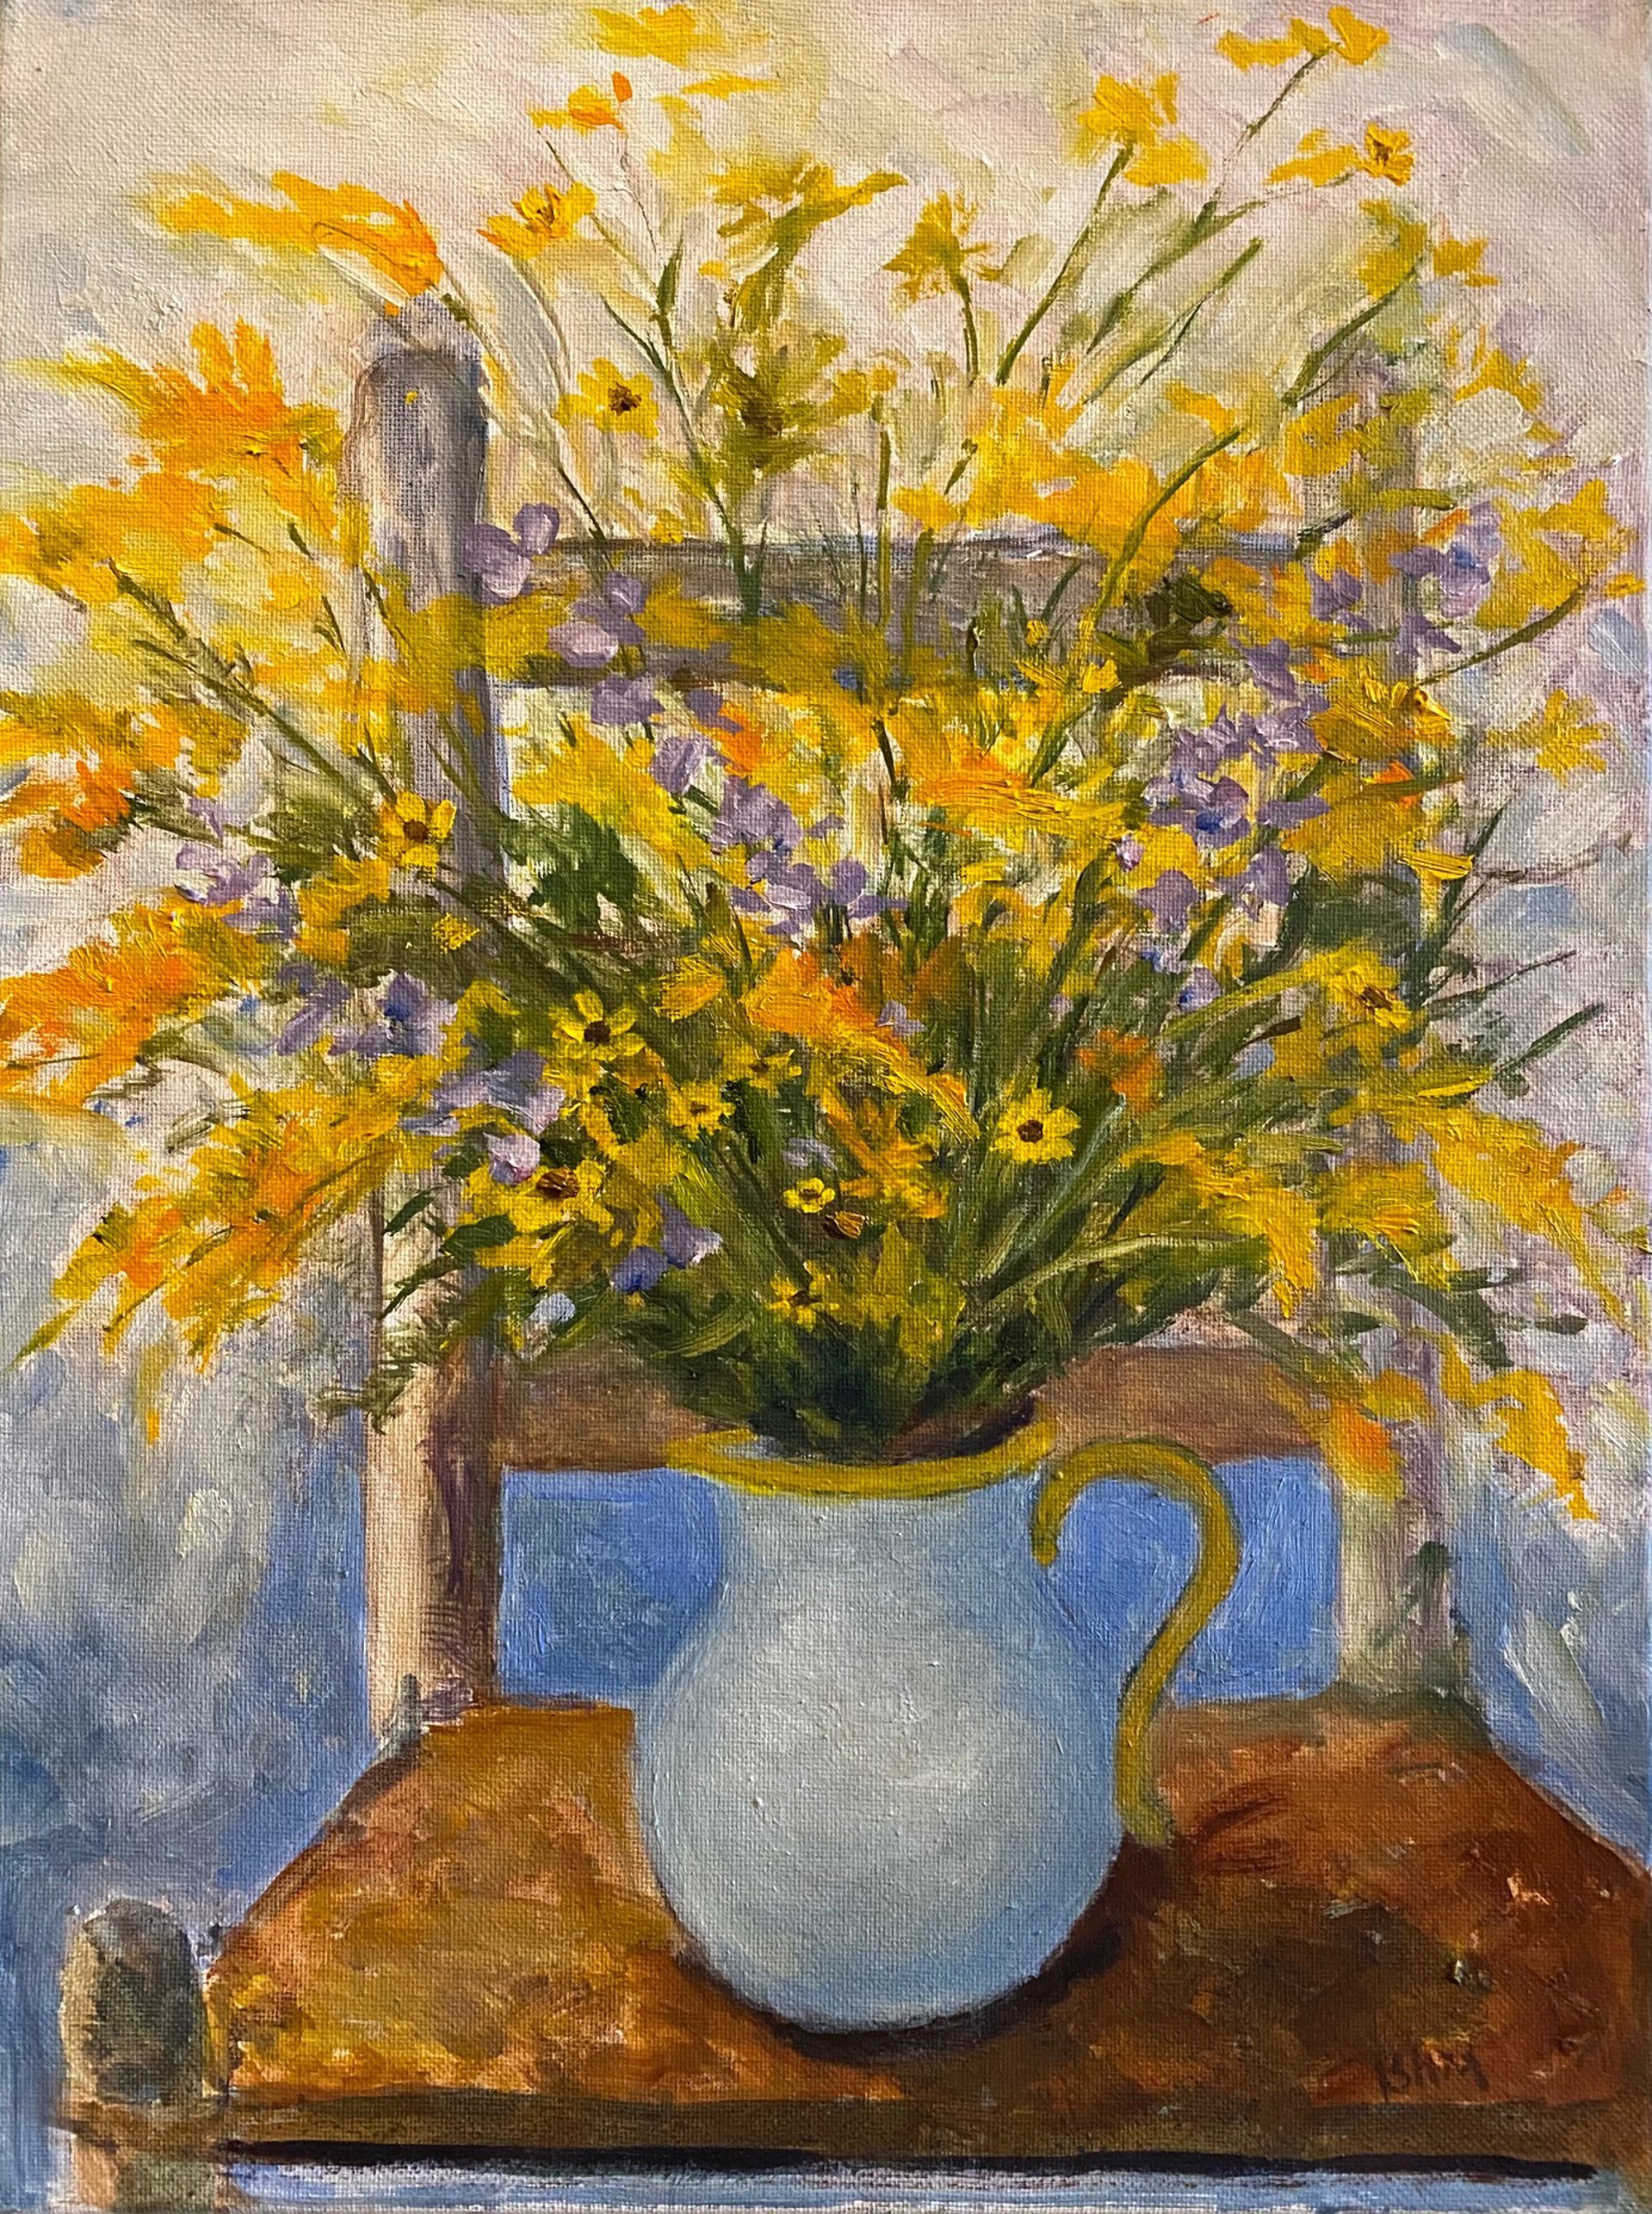 Sunshine In A Pitcher by Betty McGlamery